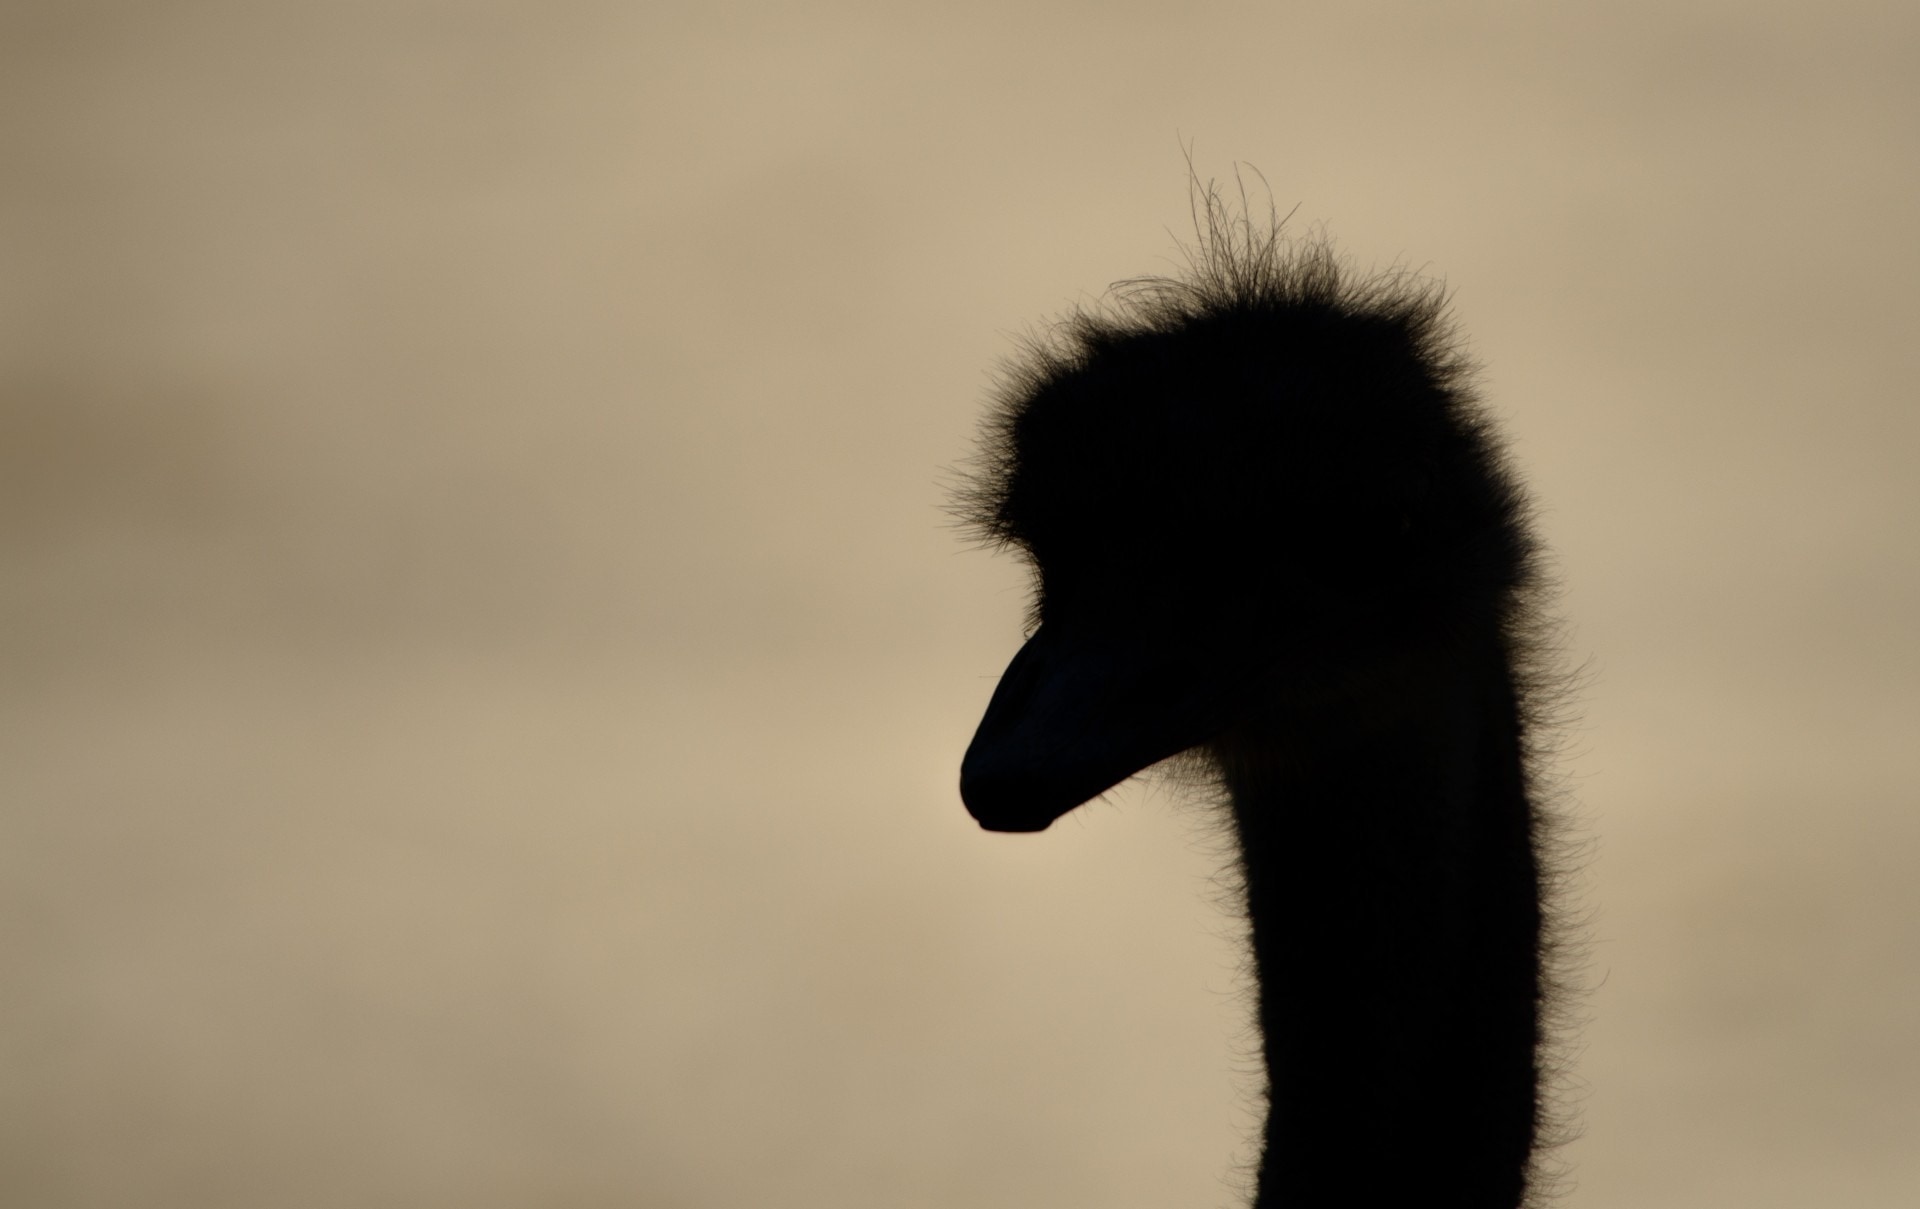 silhouette of ostrich